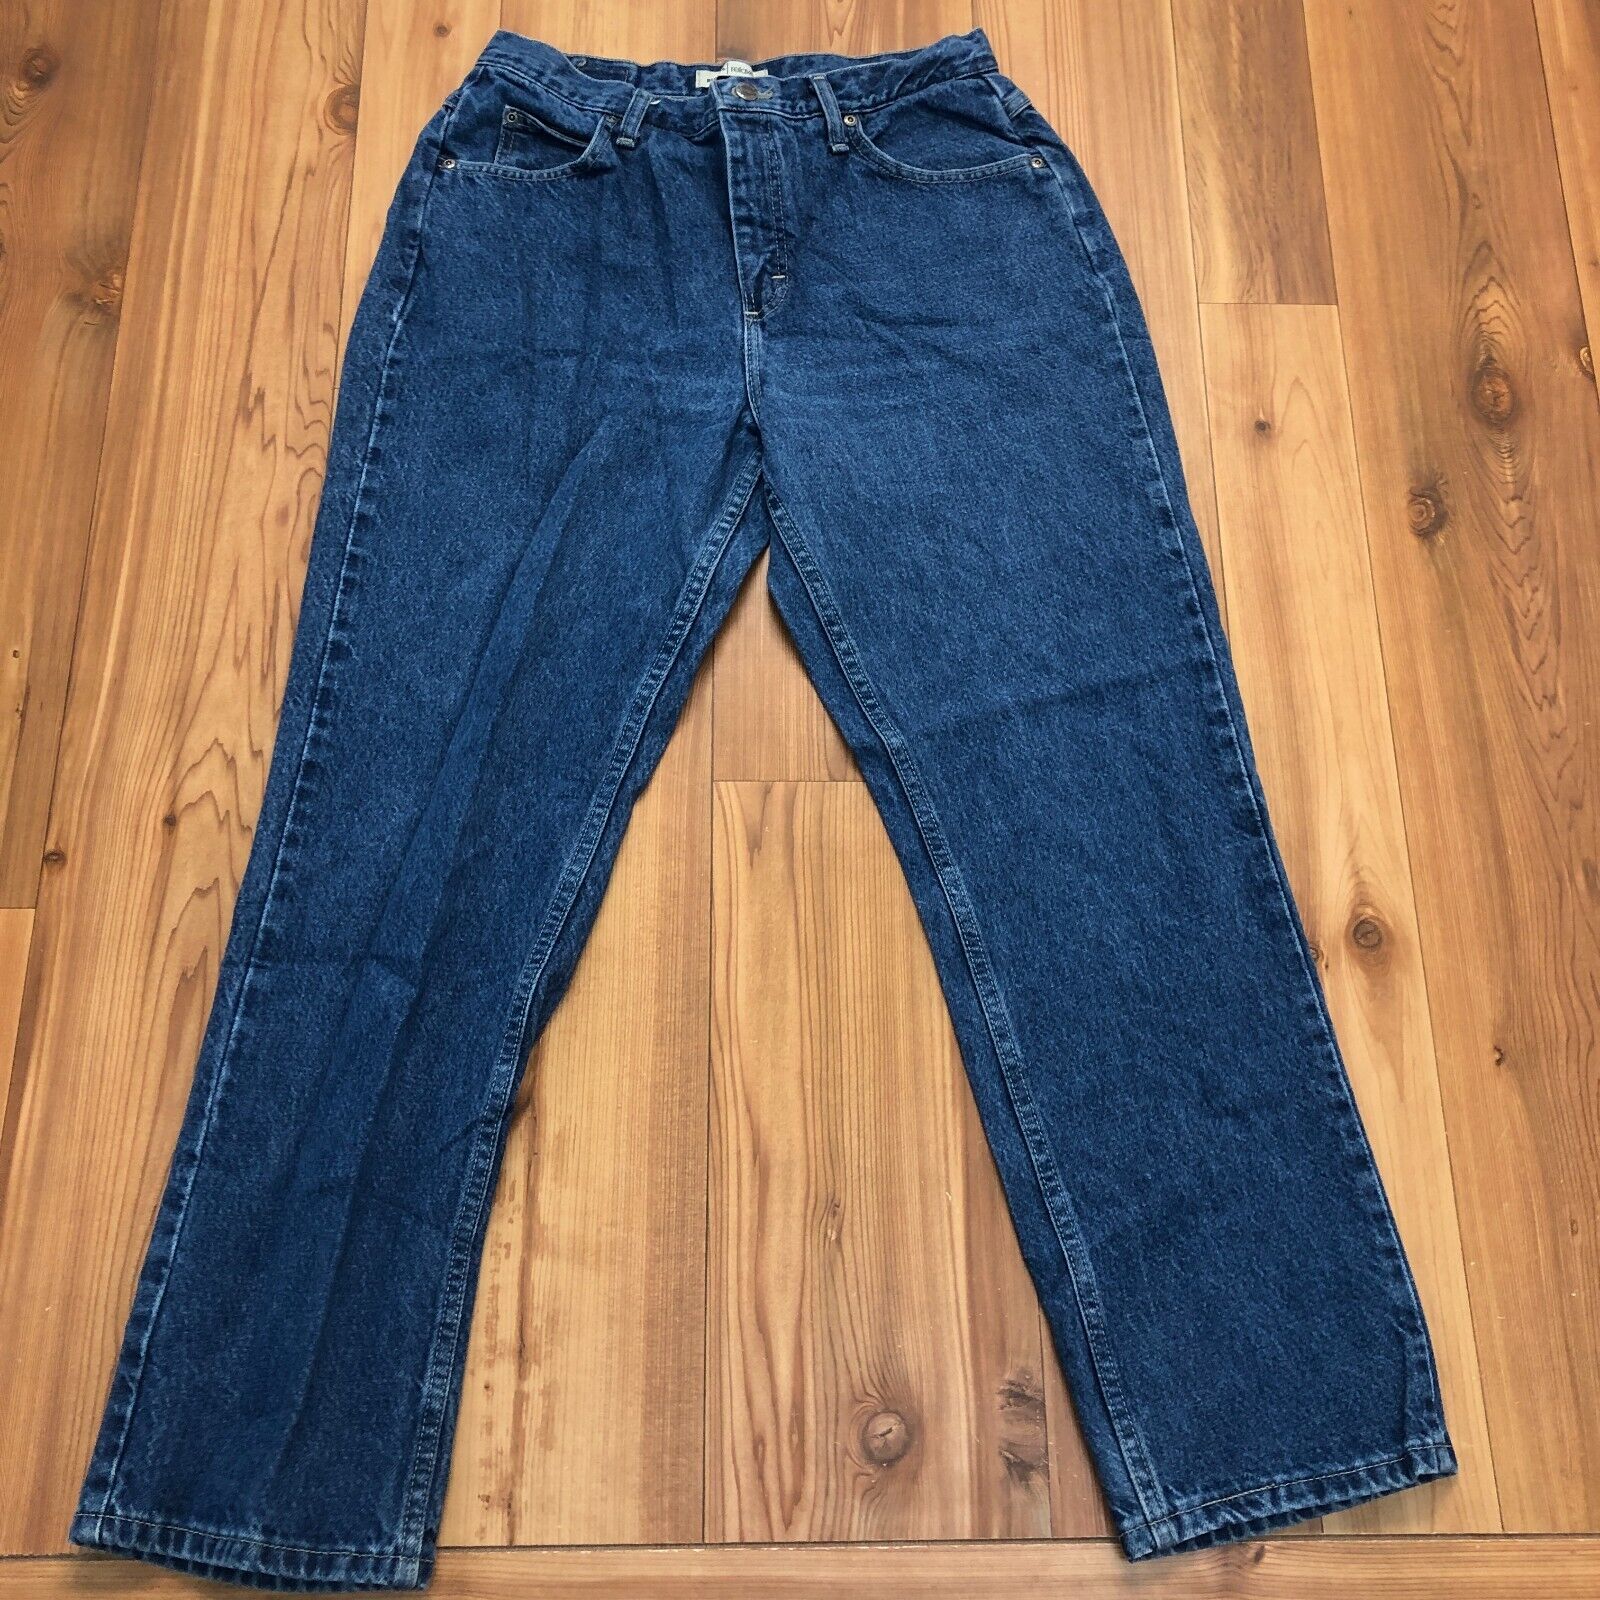 Riders Blue Flat Front Chino Cotton Relaxed Fit Jeans Adult Size 12